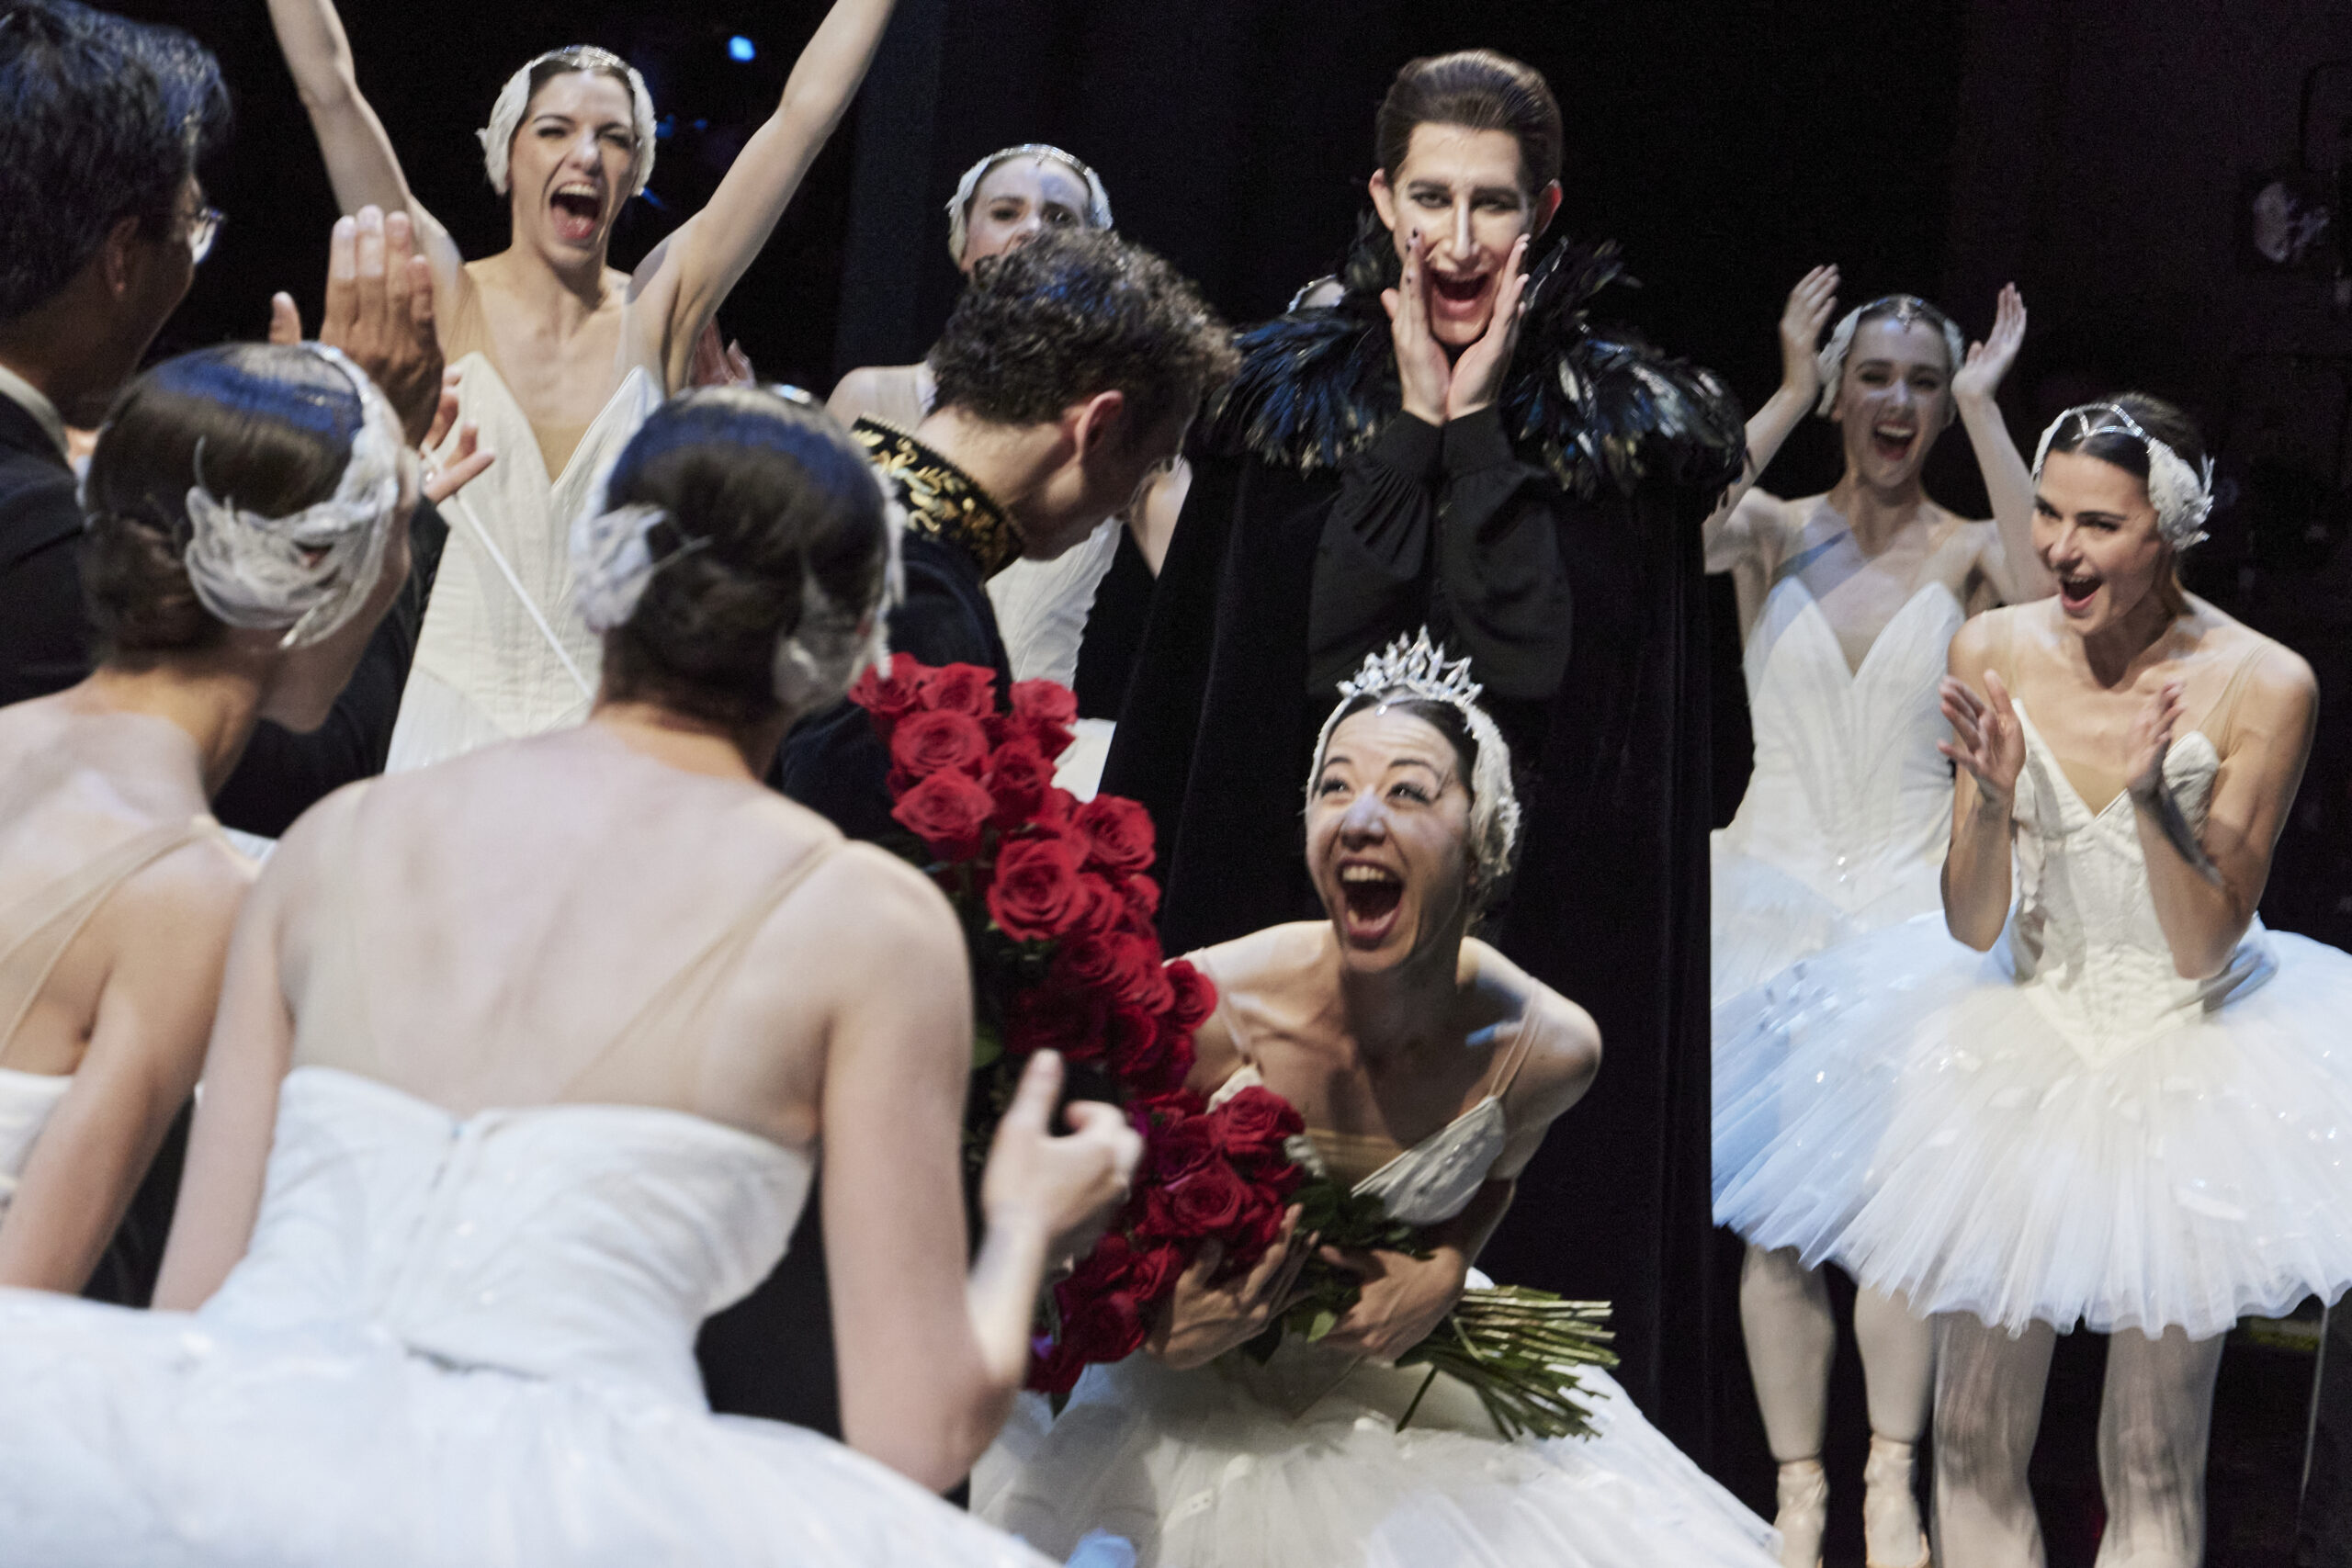 Jill Ōgai, in costume as Odette, bends forward as she clutches a bouquet of roses. She seems to be yelling or laughing in excitement and joy as her castmates surround her cheering and applauding.